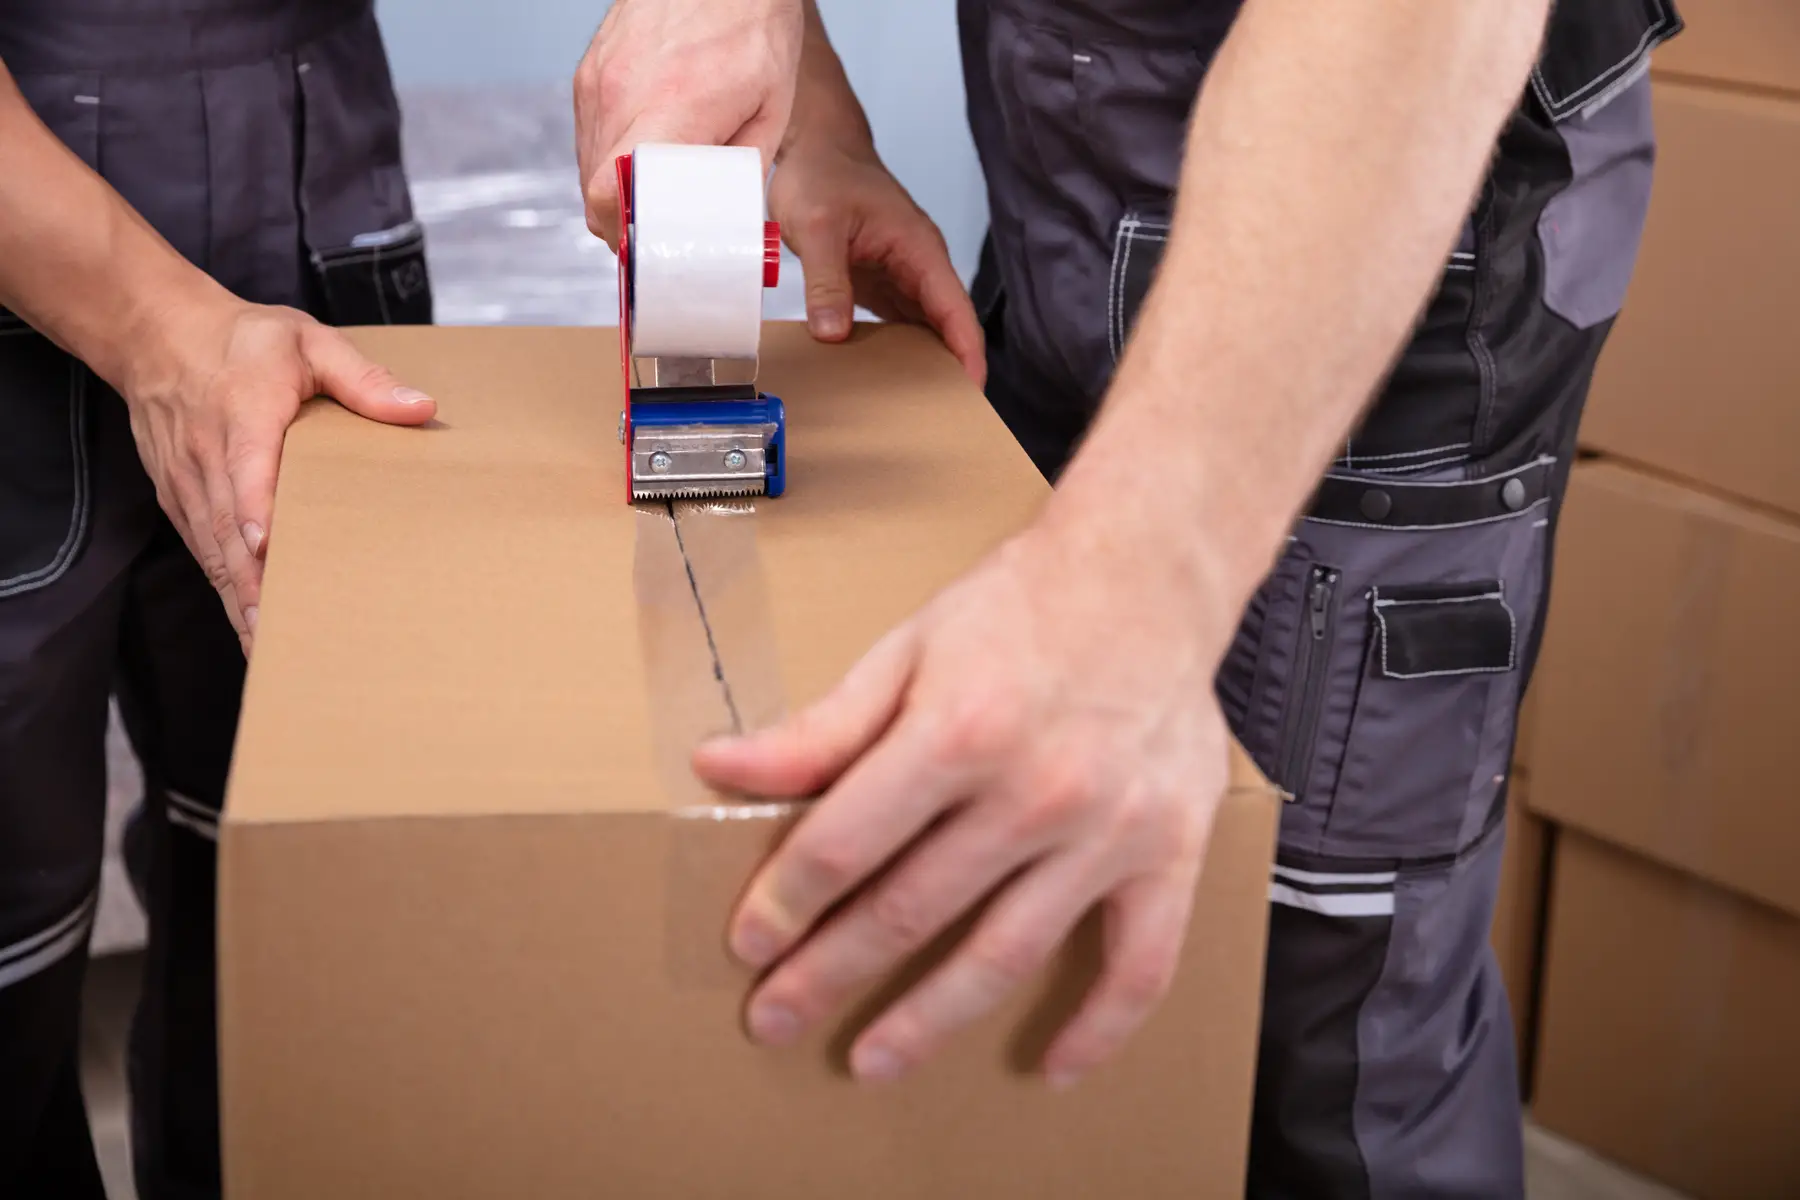 professional movers packaging cardboard boxes with a tape gun